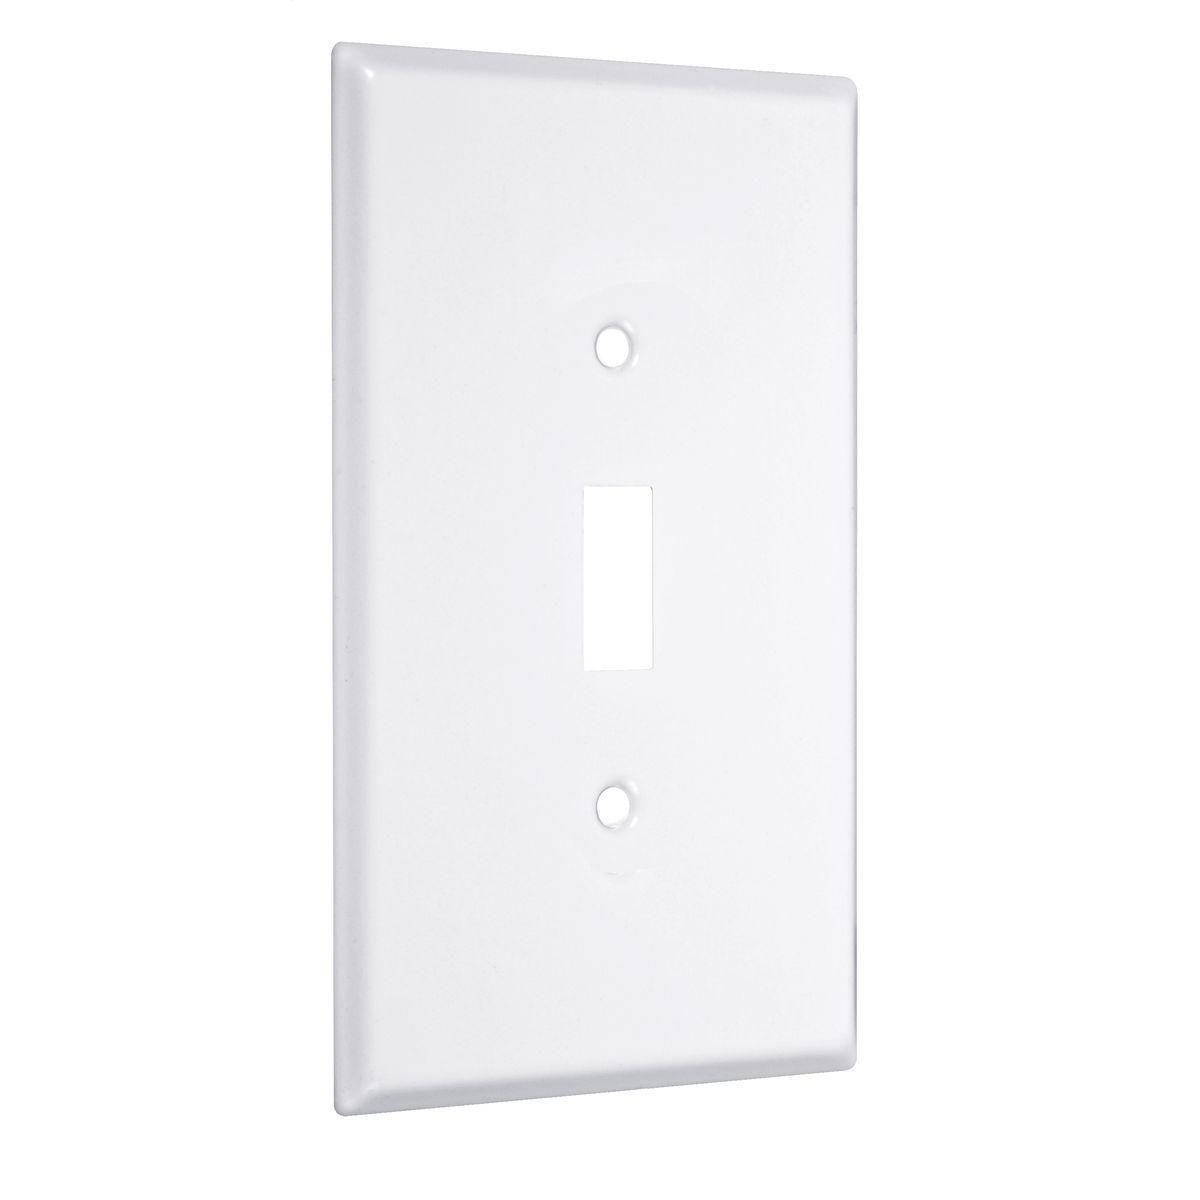 Hubbell WJW-T 1-Gang Metal Wallplate, Jumbo, 1-Toggle, White Smooth  ; Easily primed and painted to match or complement walls. ; Won't bow, crack or distort during installation. ; Premium North American powder coat. ; Includes screw(s) in matching finish.